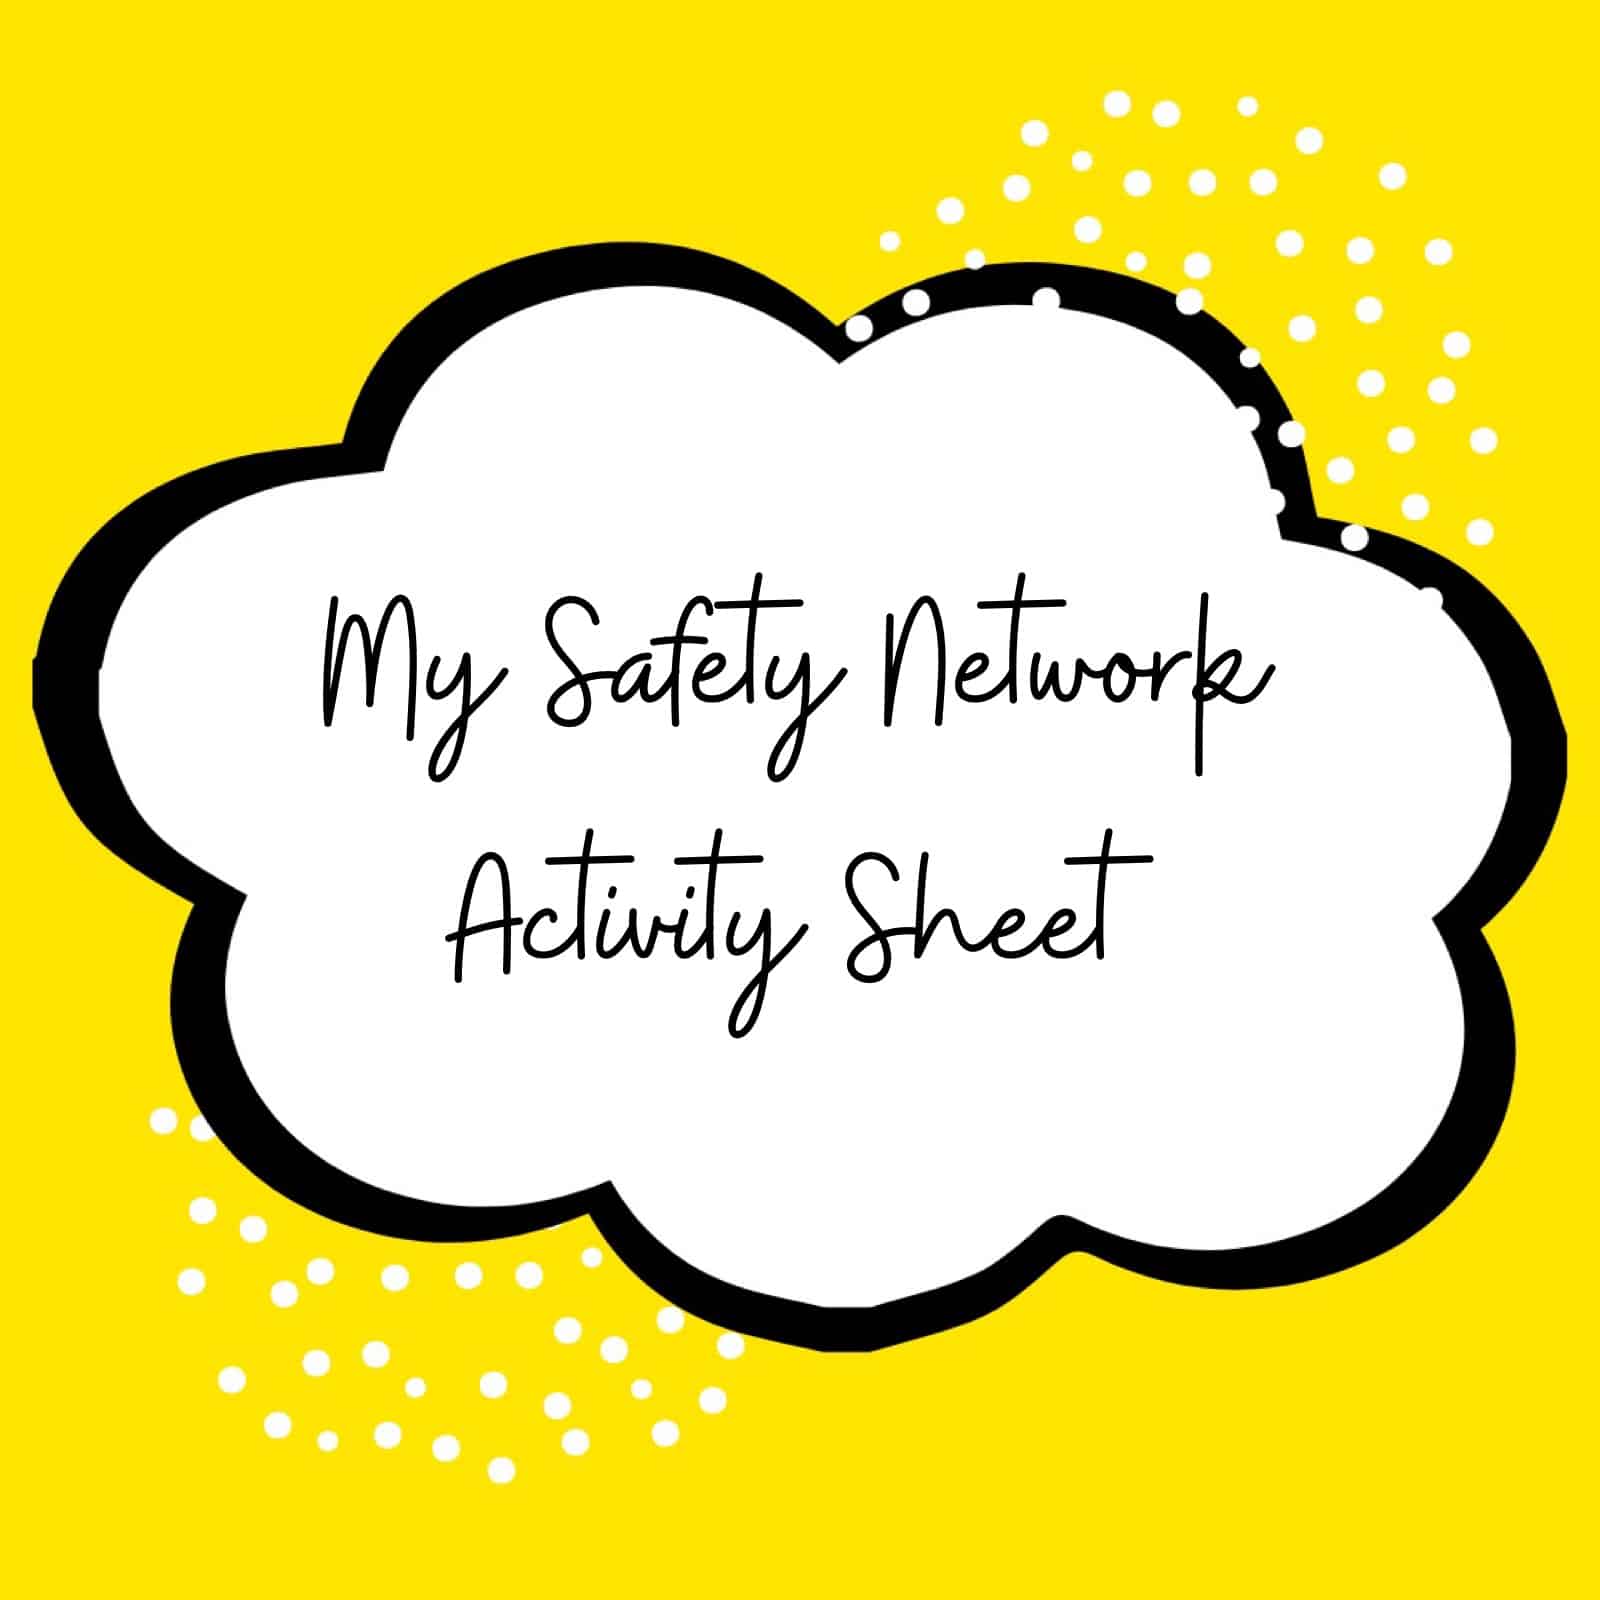 My safety network activity sheet